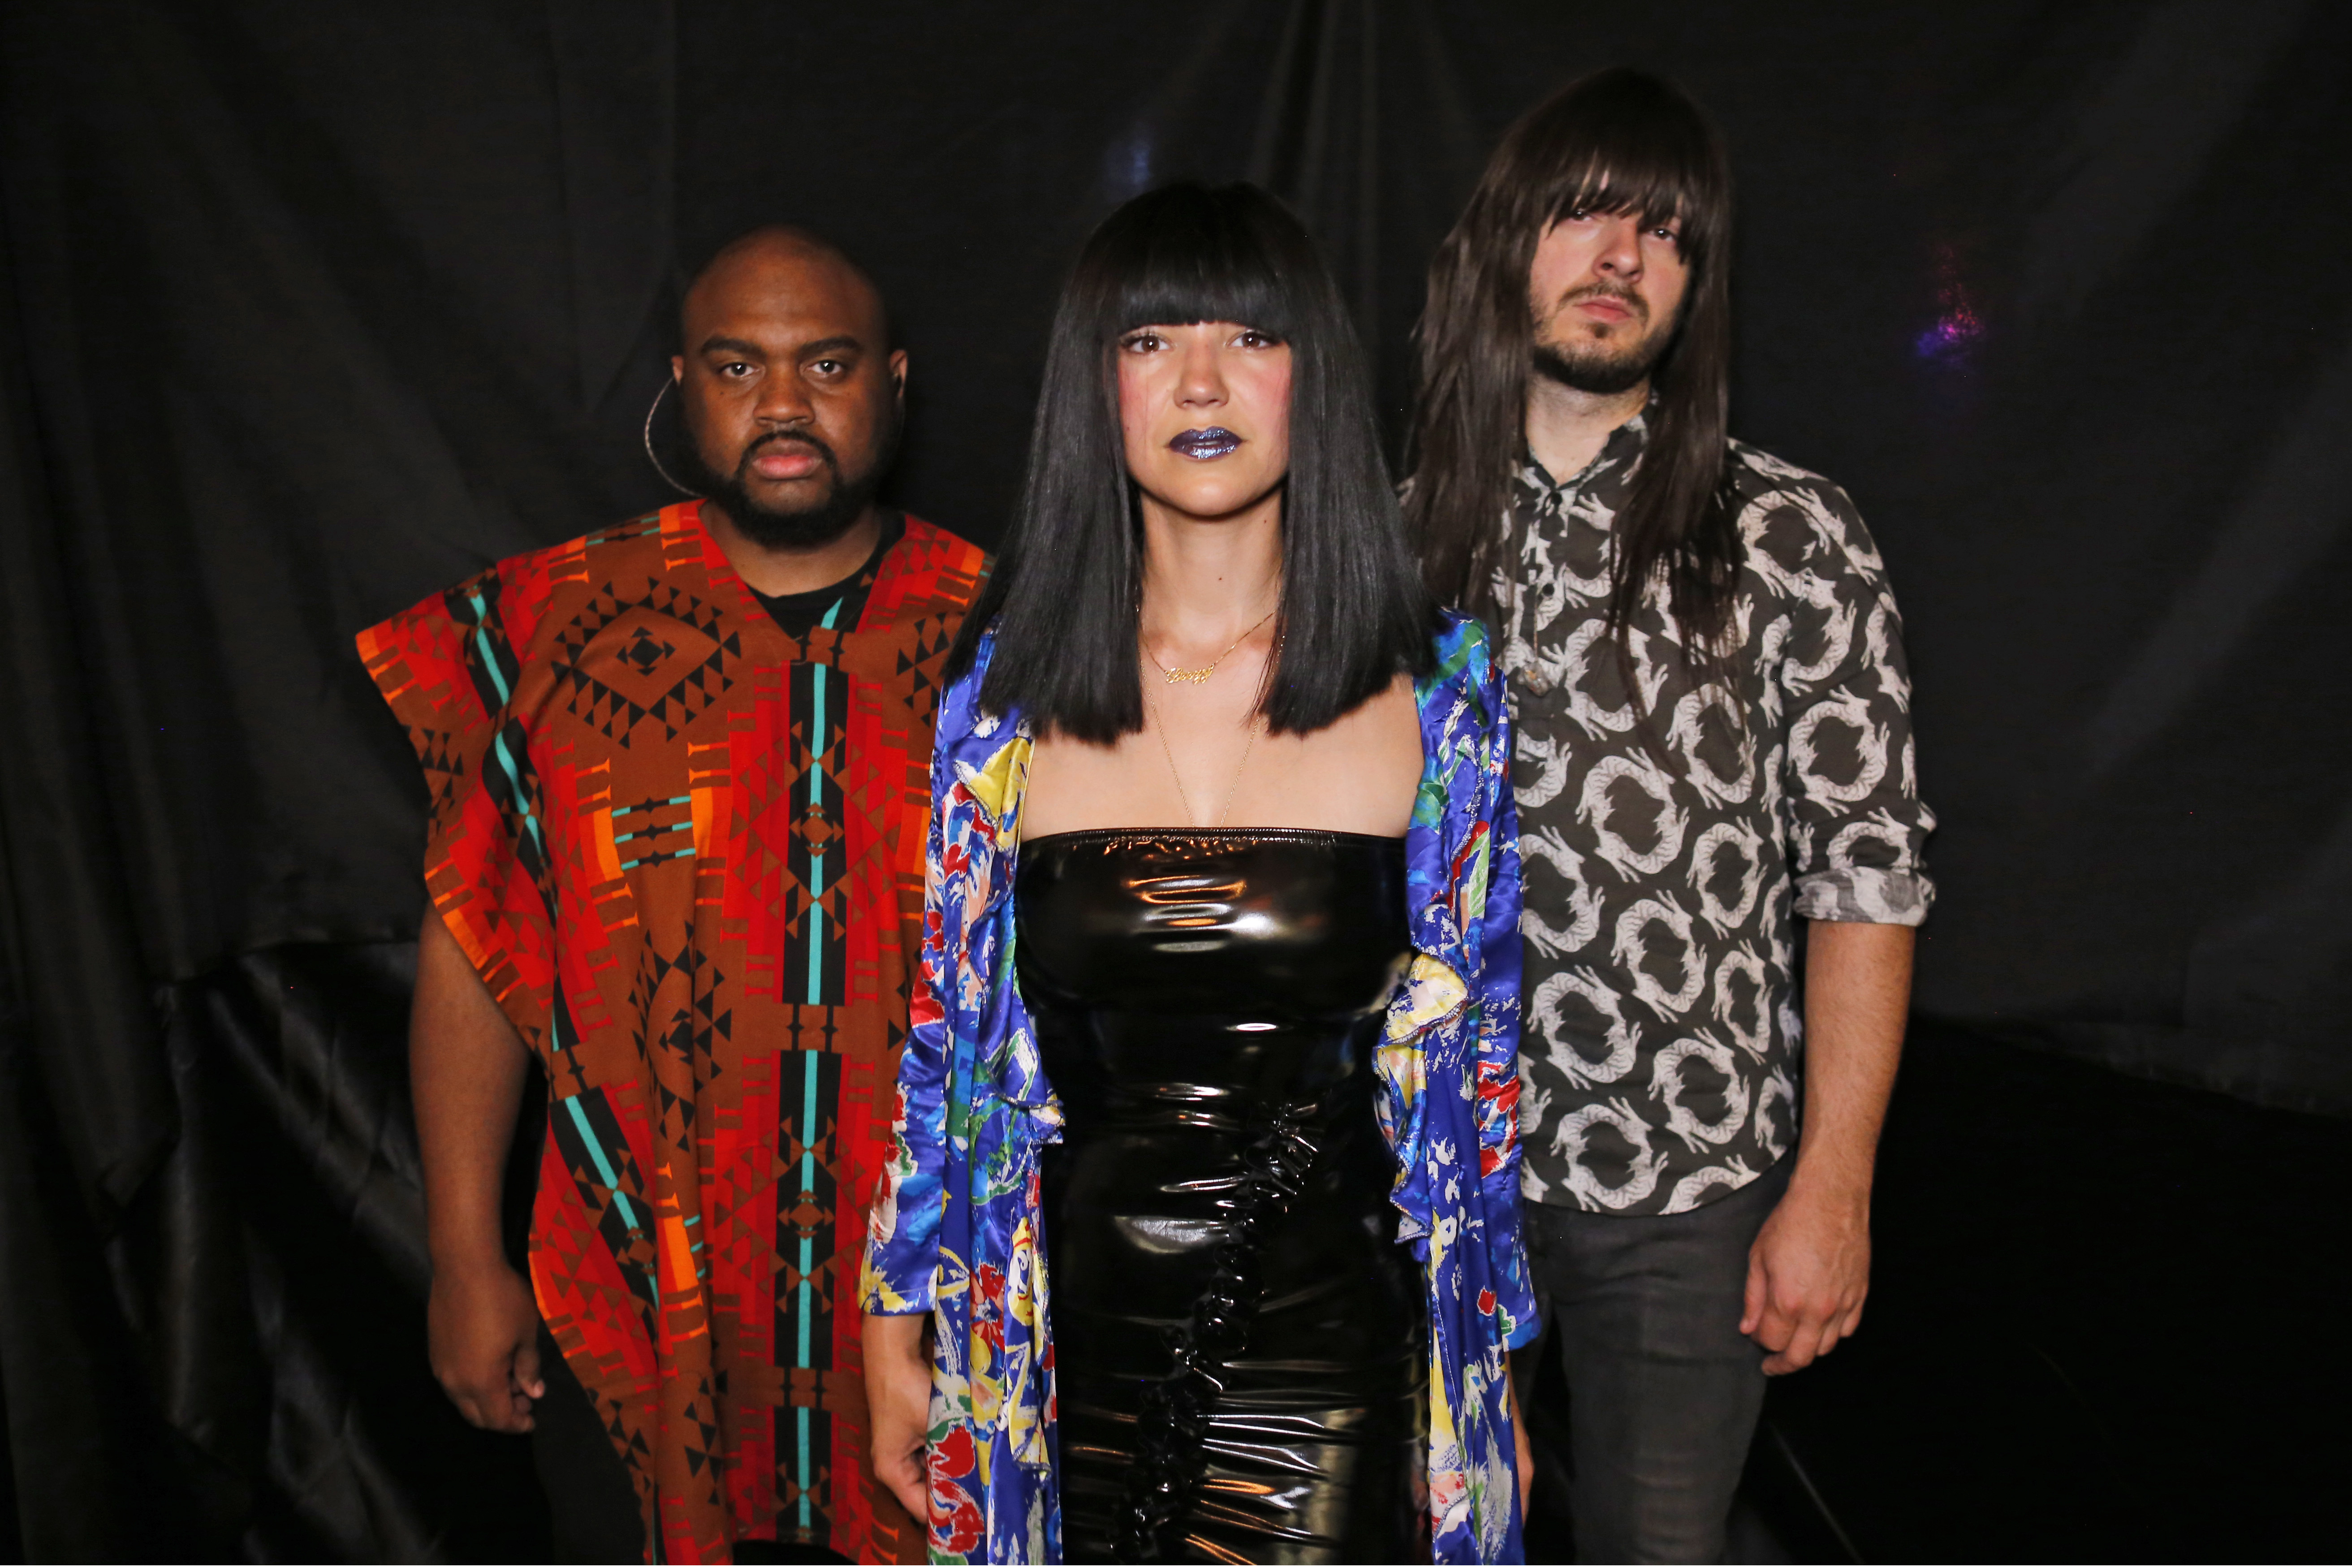 Khruangbin, an American musical trio from Houston, Texas. L to R: Donald Ray “DJ” Johnson Jr. on drums, Laura Lee on bass, Mark Speer on guitar. In Bangkok, Thailand, May 20, 2018. Photo: Charles Dharapak